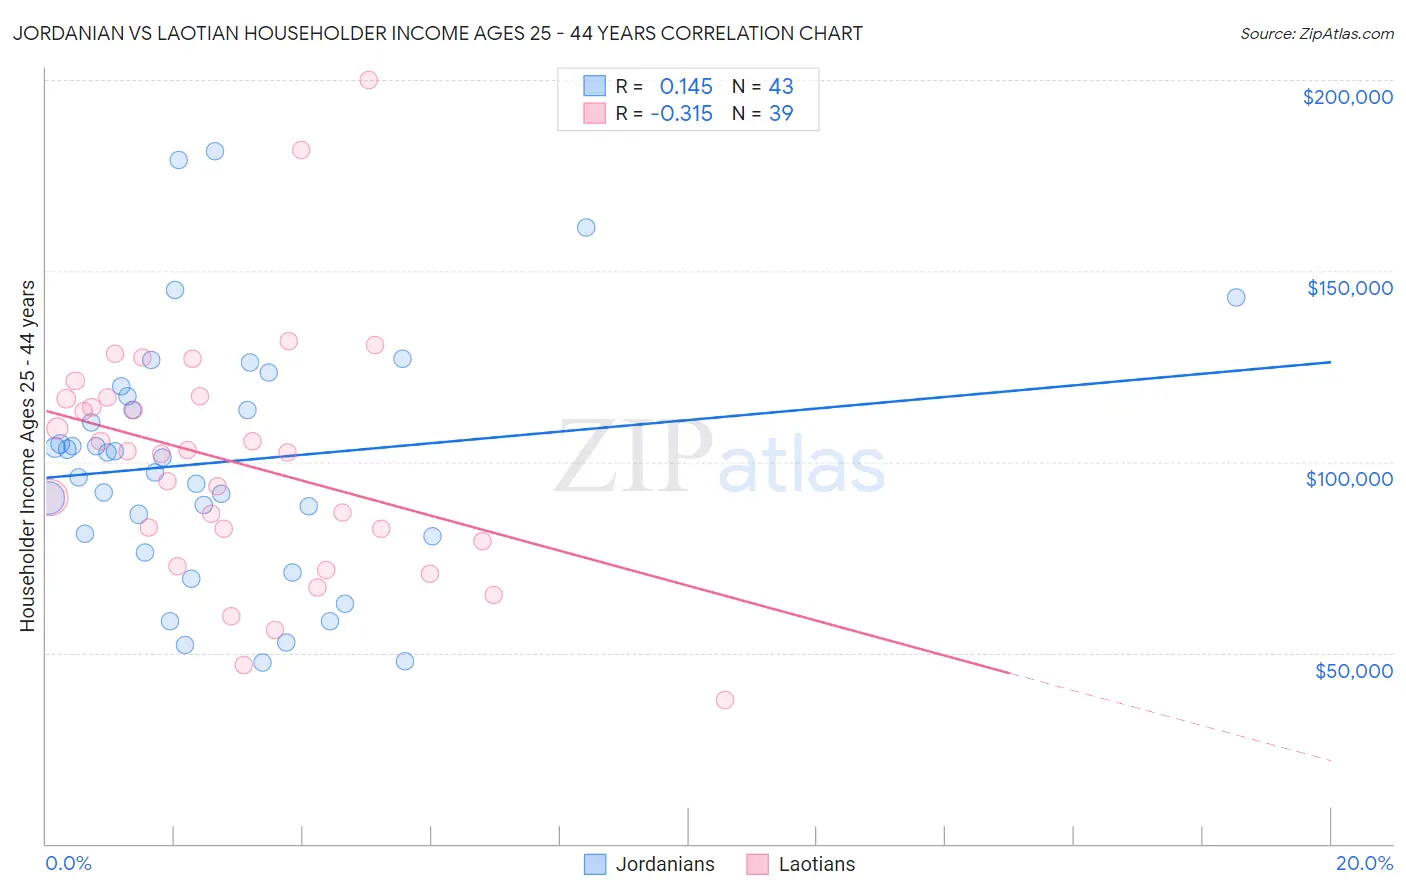 Jordanian vs Laotian Householder Income Ages 25 - 44 years